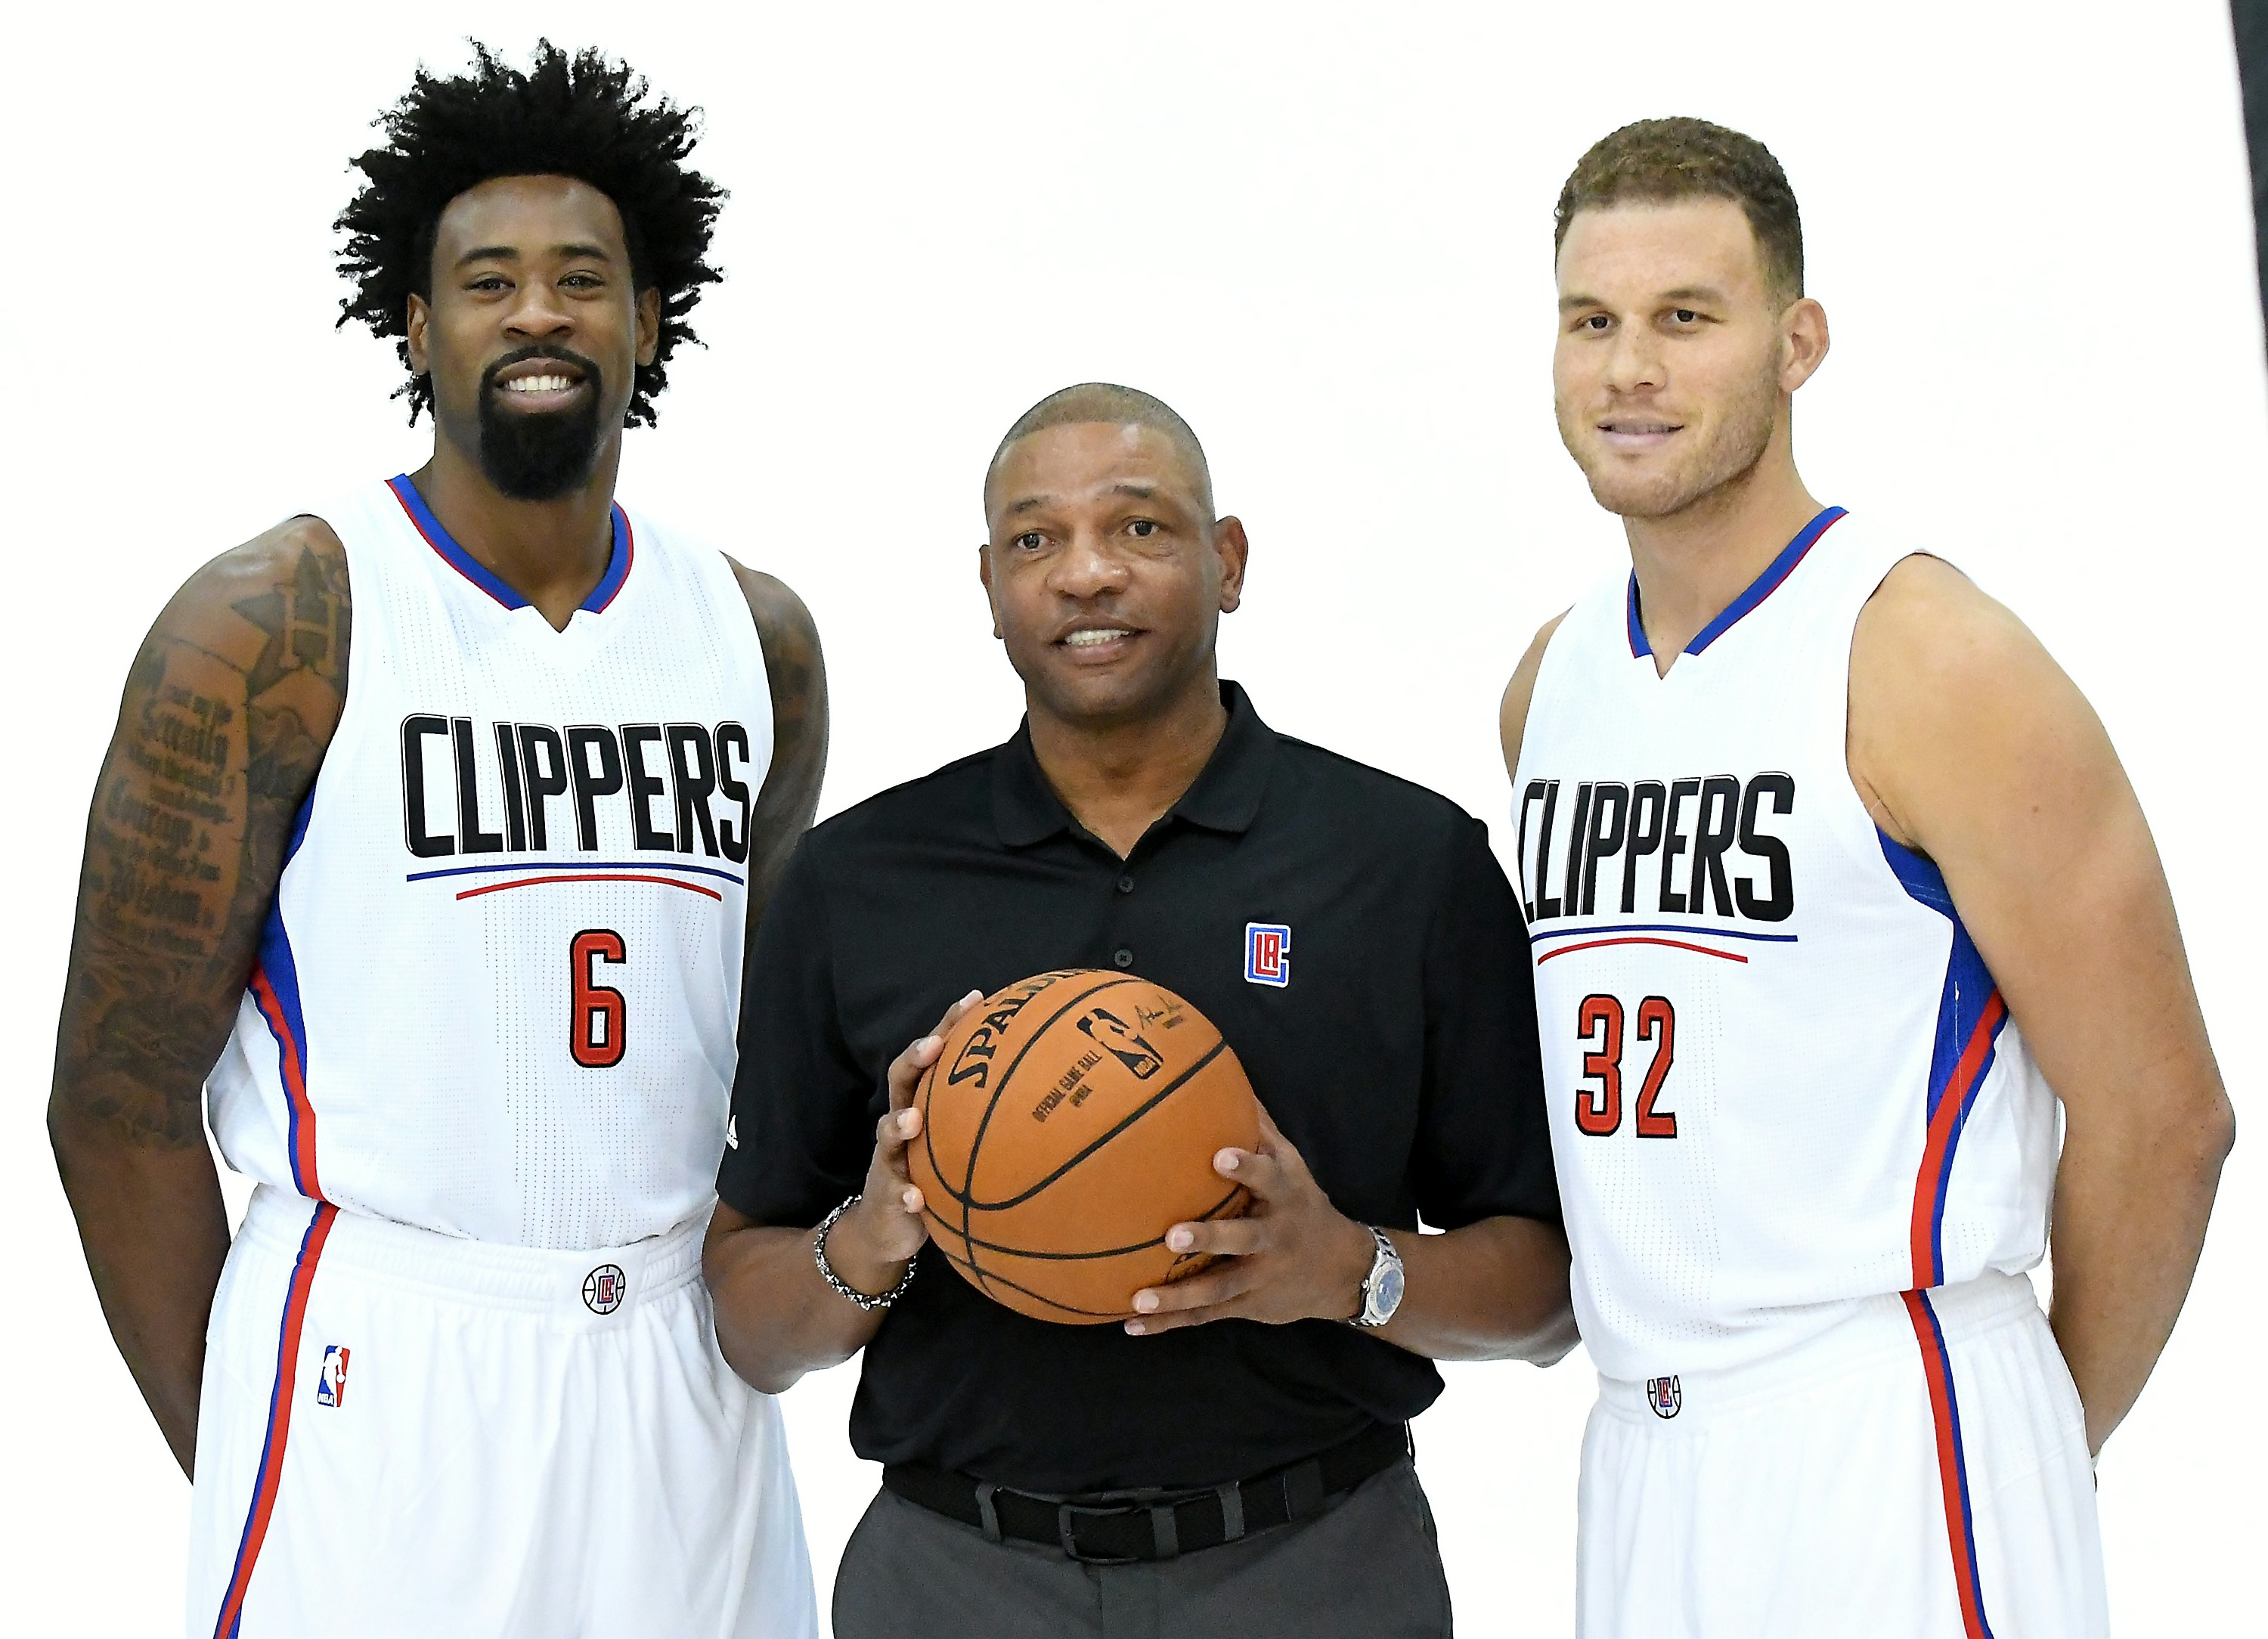 los angeles clippers jersey 2017